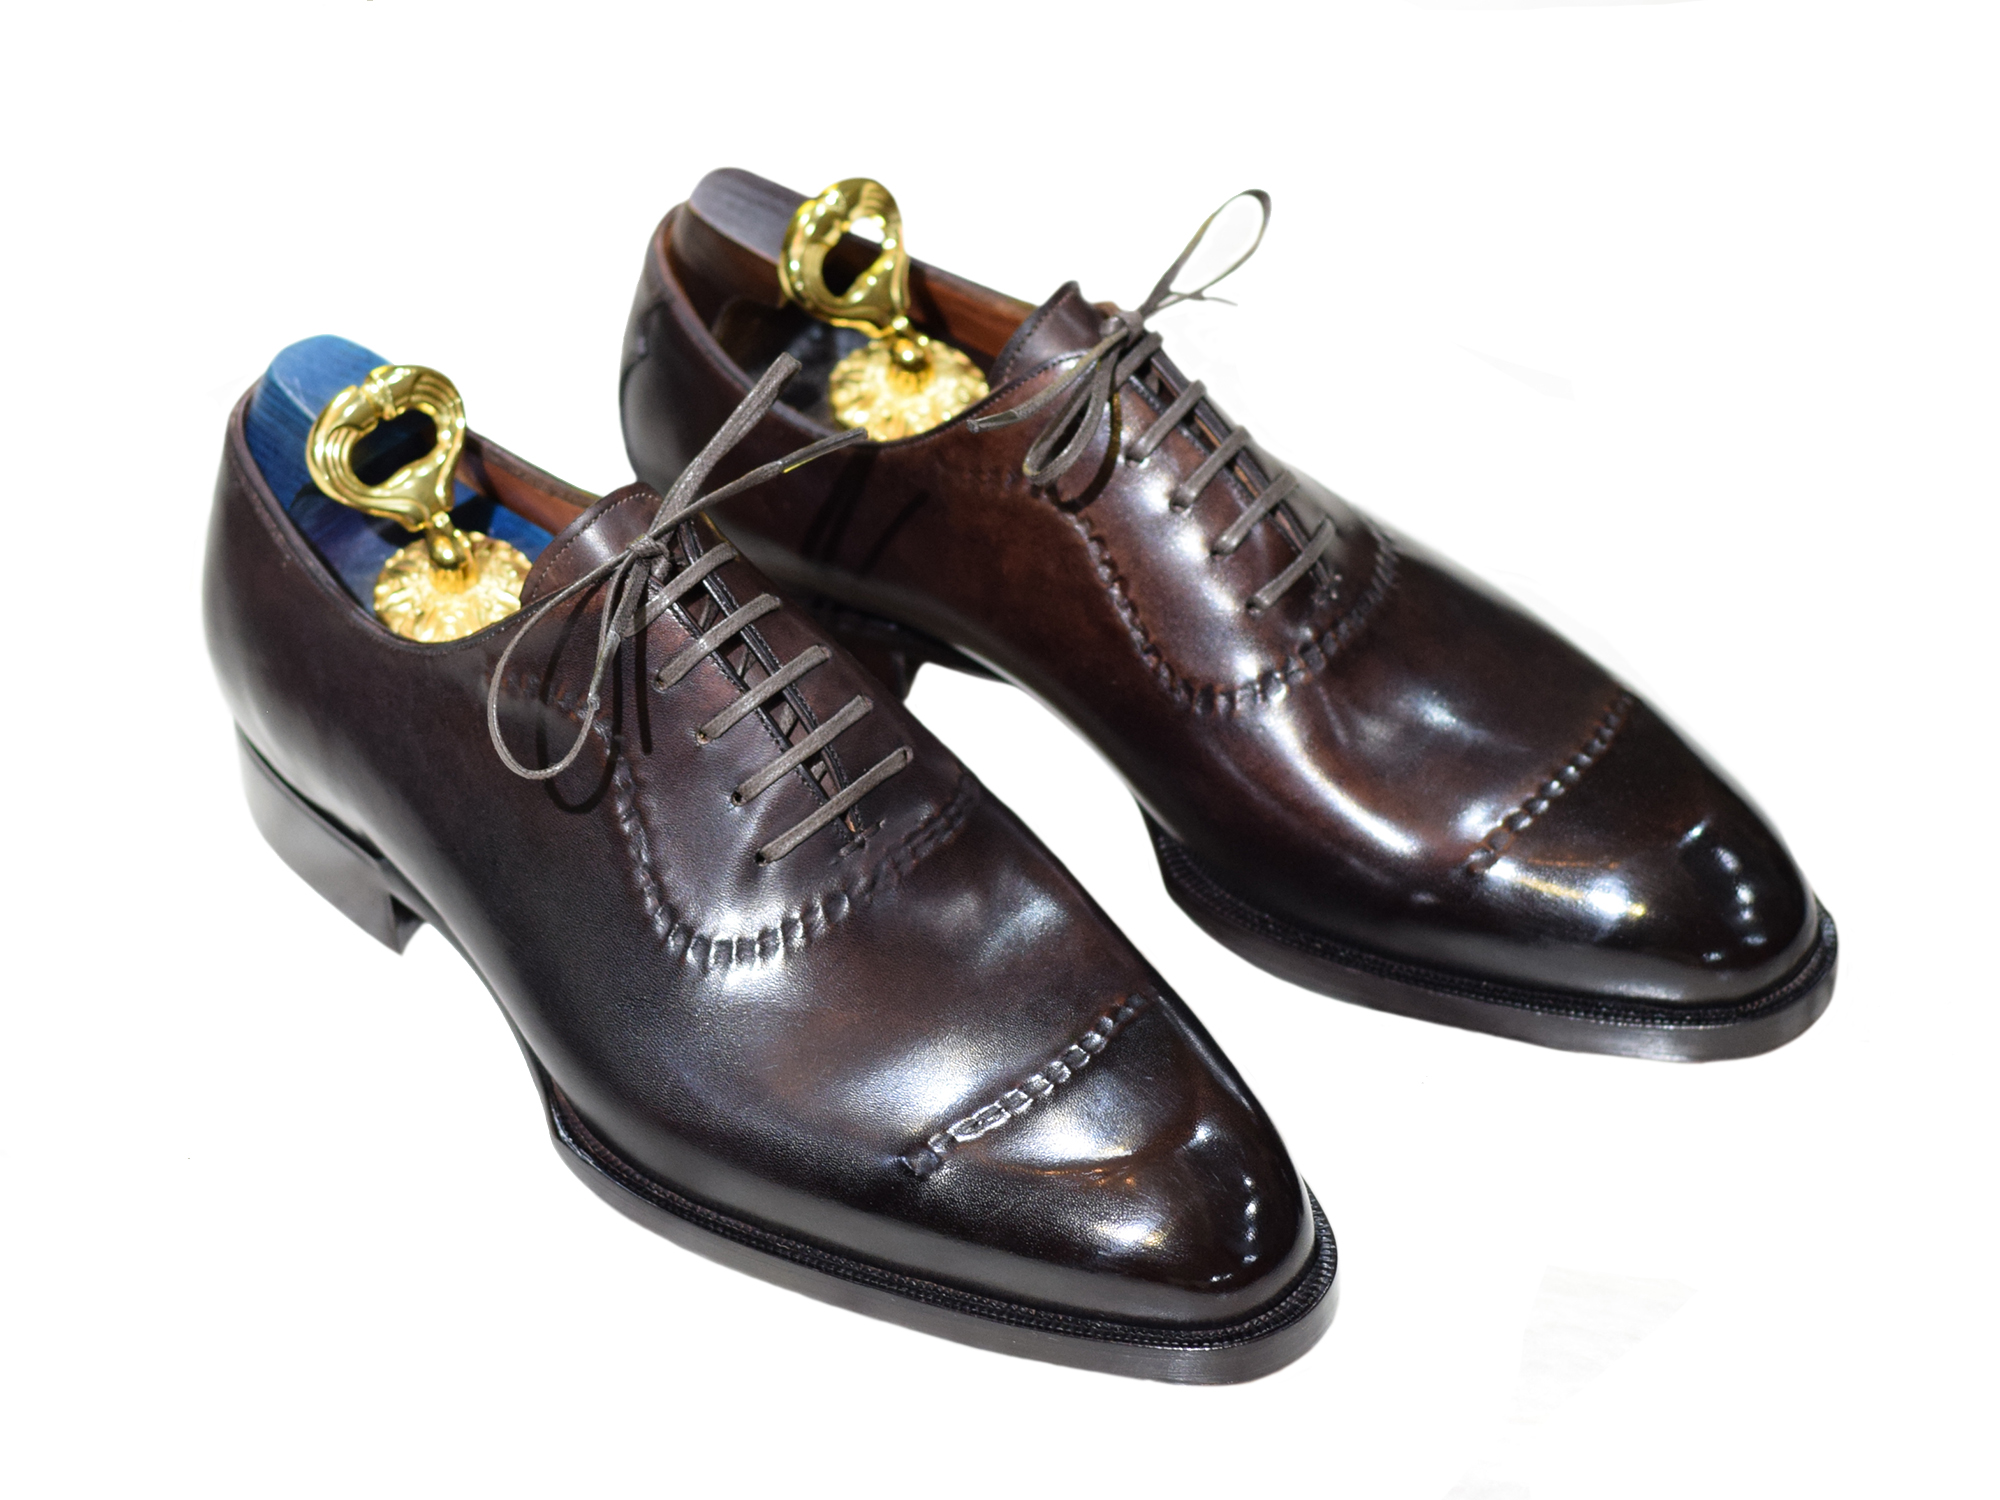 MTO Handwelt Adelaide Reverse Blind shoes - Coffee&Cherry